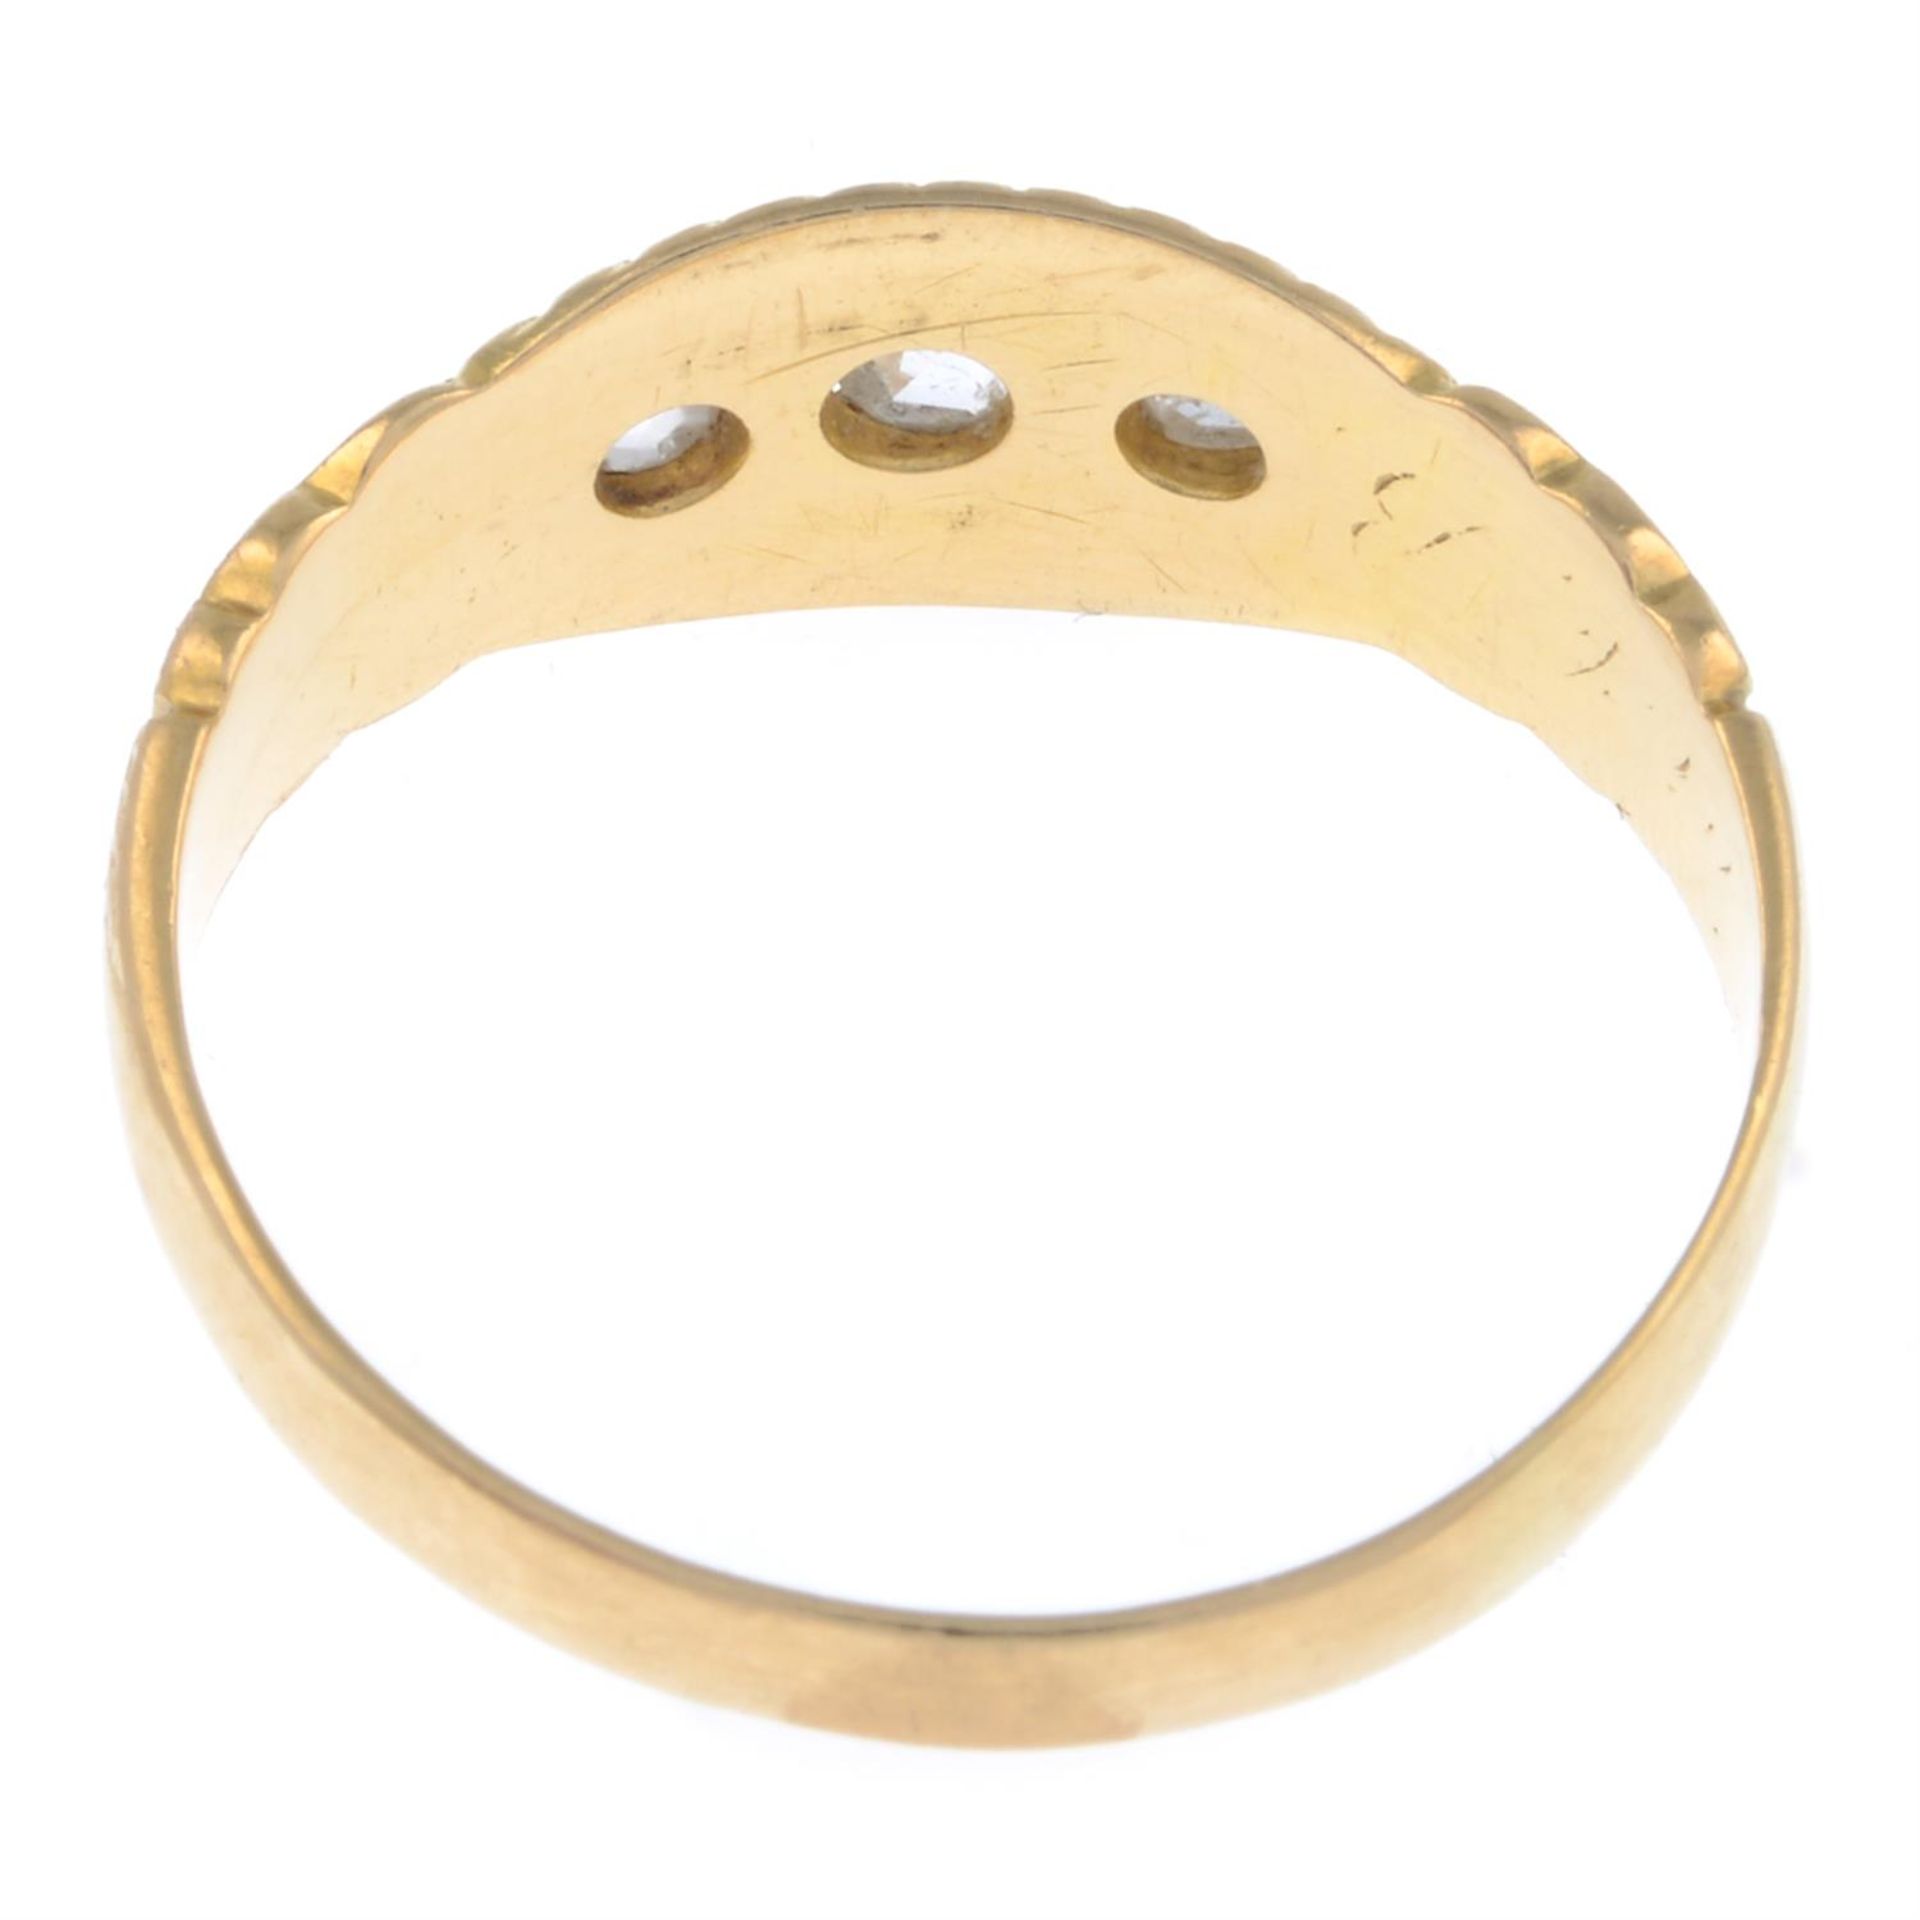 Victorian 18ct gold diamond ring - Image 2 of 2